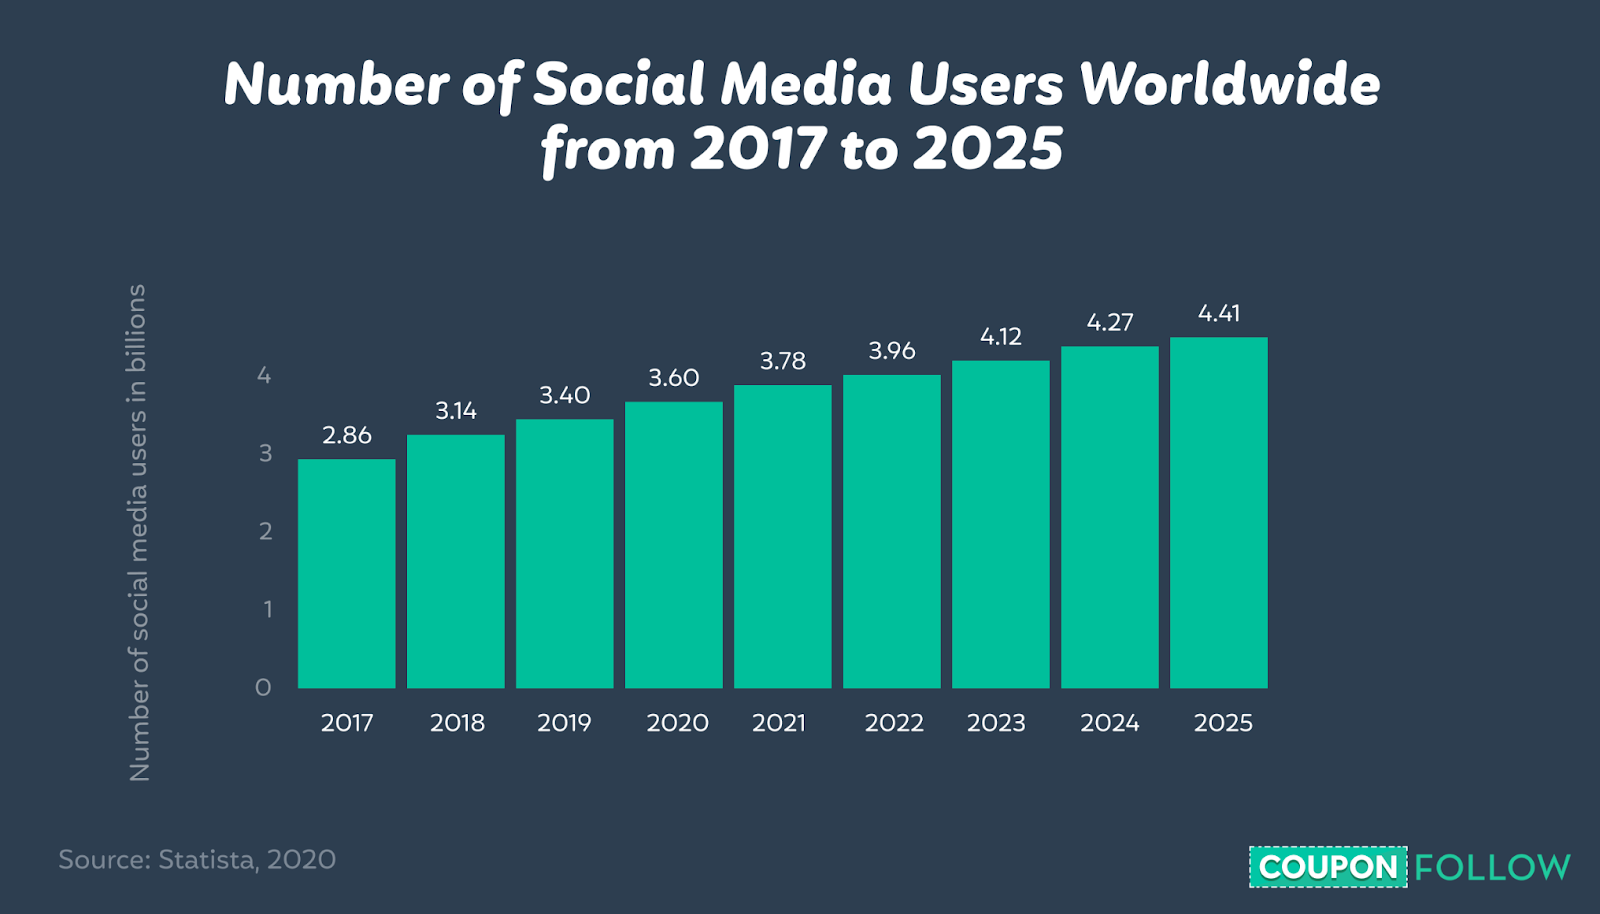 graph depicting the number of social media users worldwide from 2017 to 2025